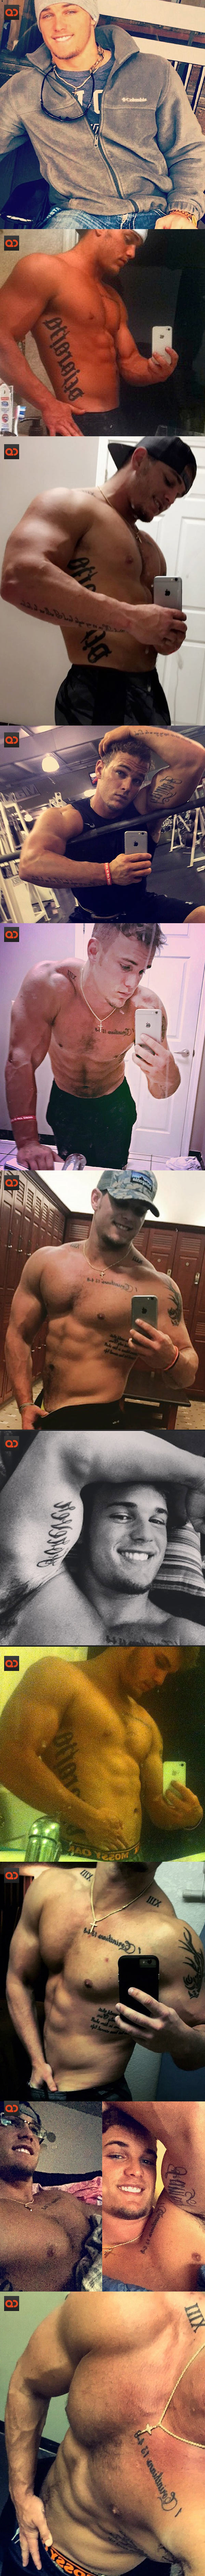 Hunter Brian Barfield, From MTV's “Are You The One”, Allegedly Caught Wanking His Cock On Snapchat!